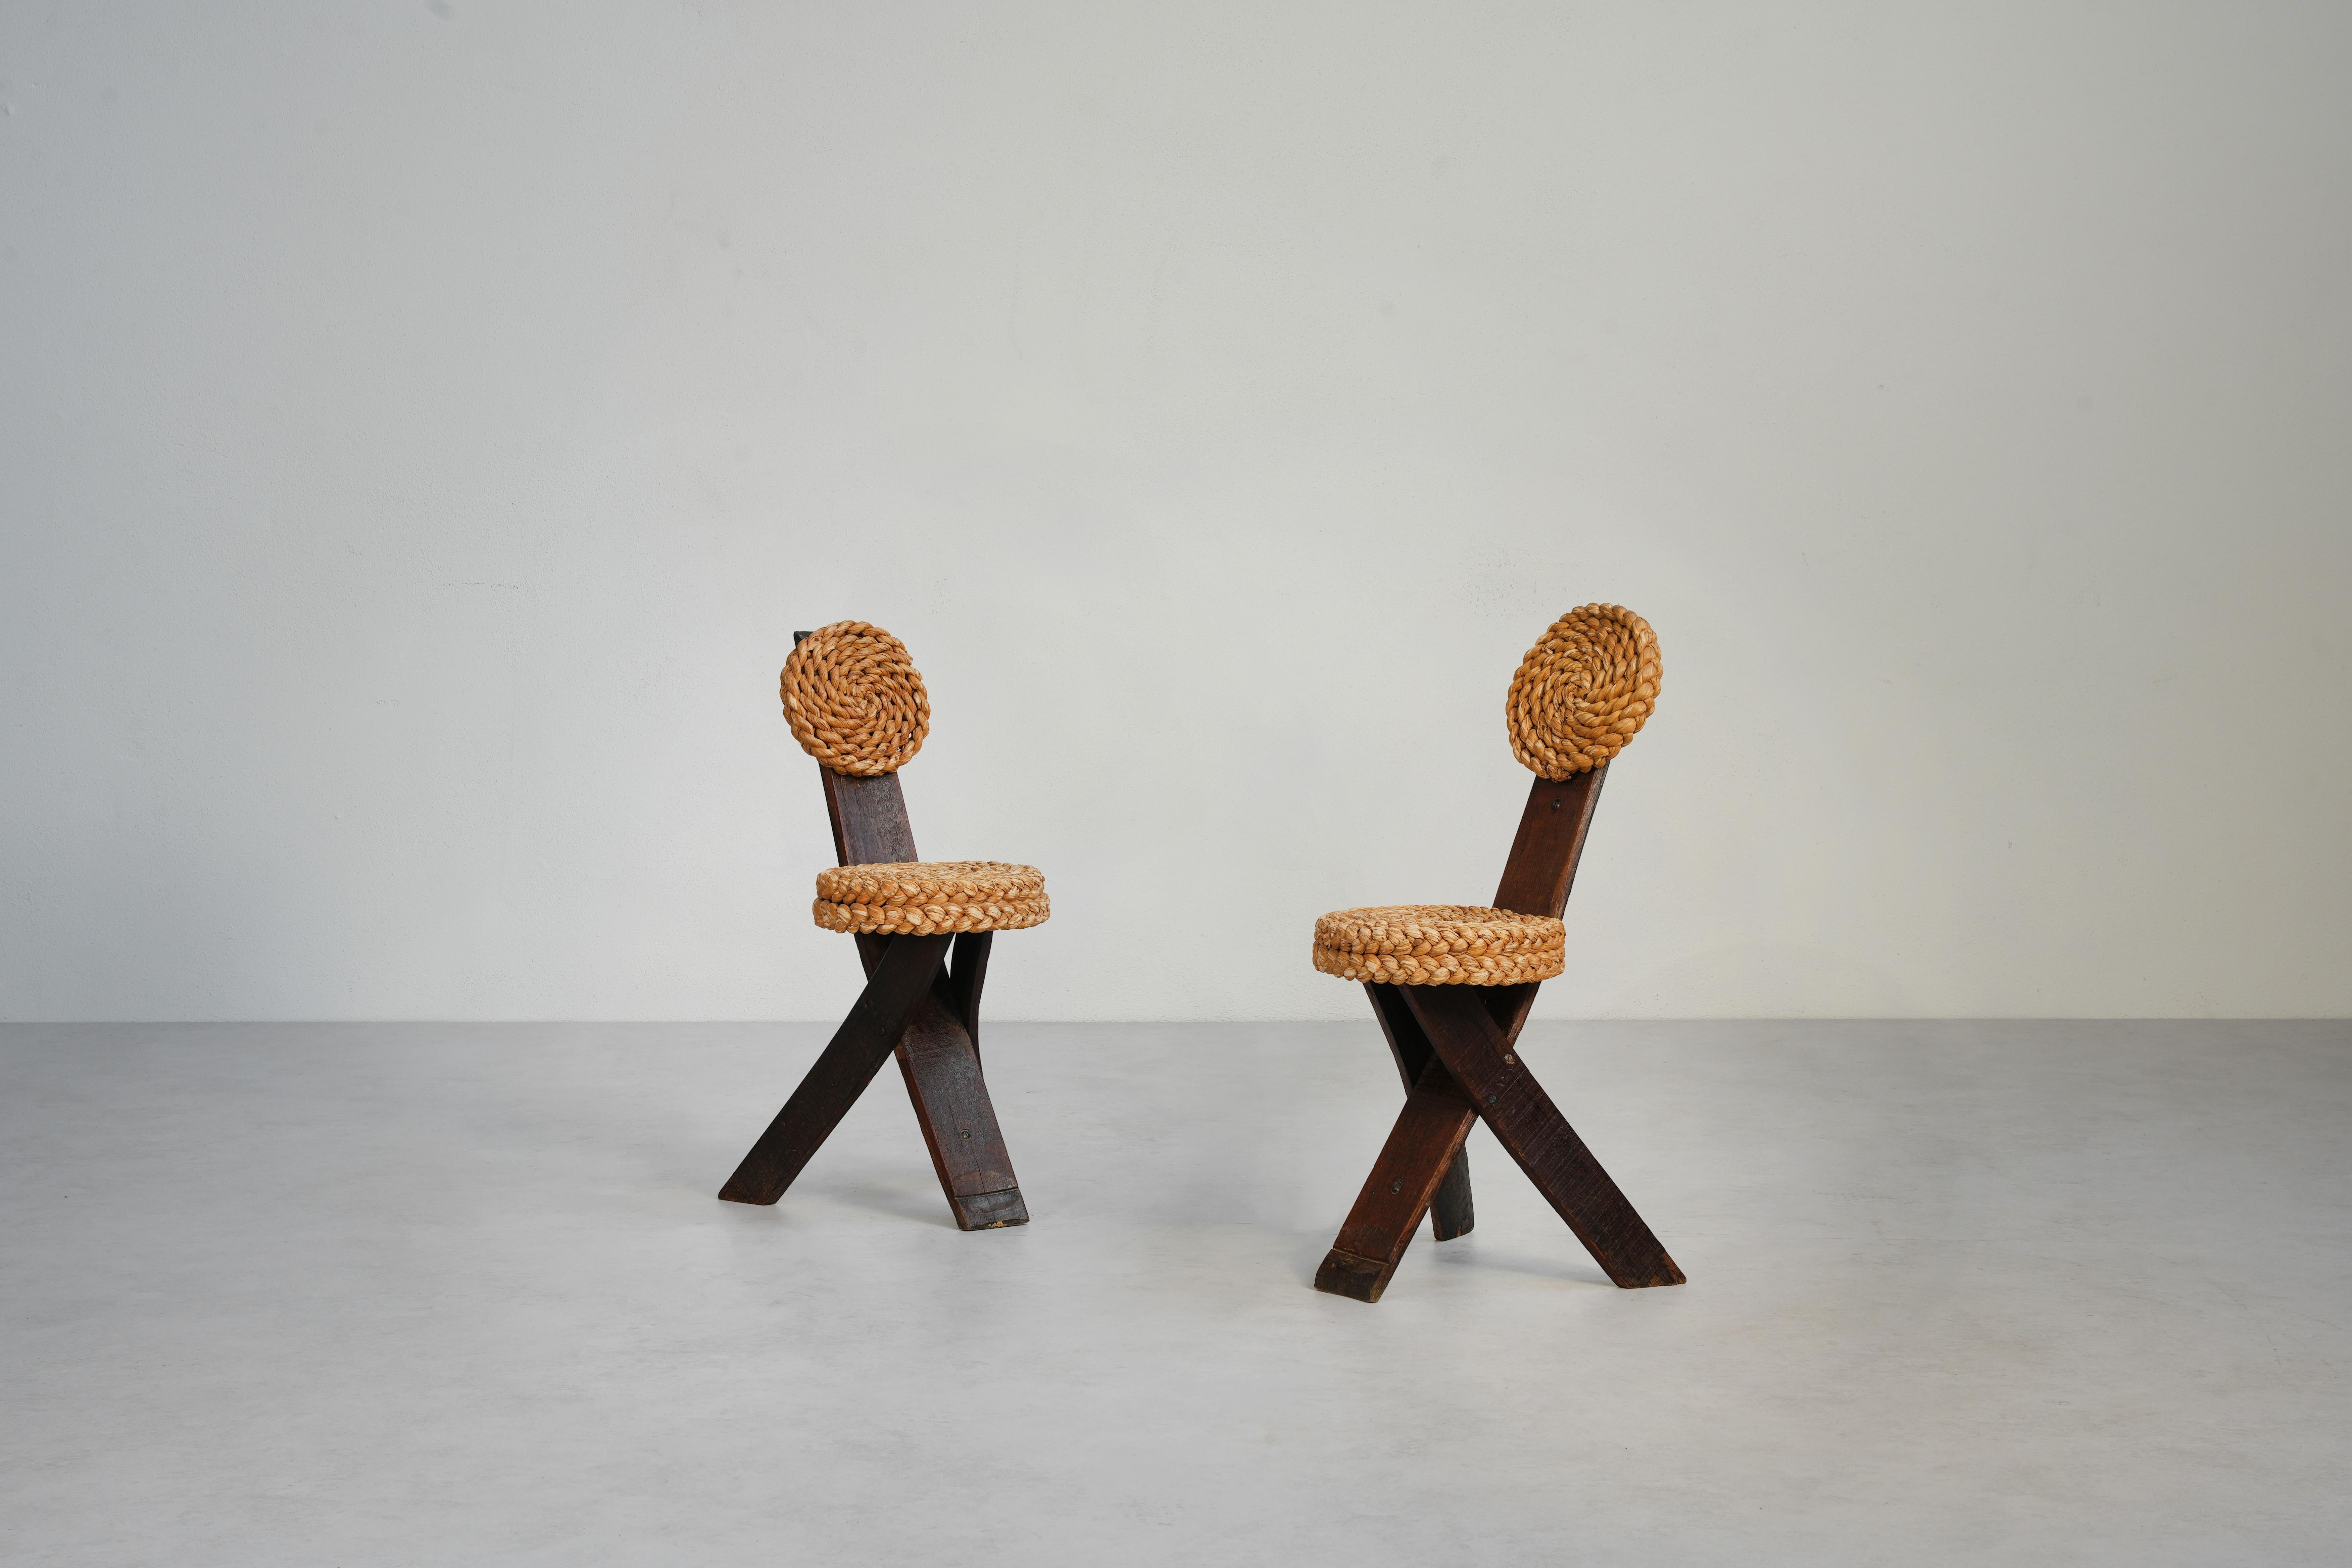 Absolutely stunning set of rope and wood chairs designed by Frida Minet and Adrien Audoux, hailing from 1950s France. These distinctive artistic chairs showcase the quintessential modernist shaping of Audoux et Minet, featuring a minimalist frame